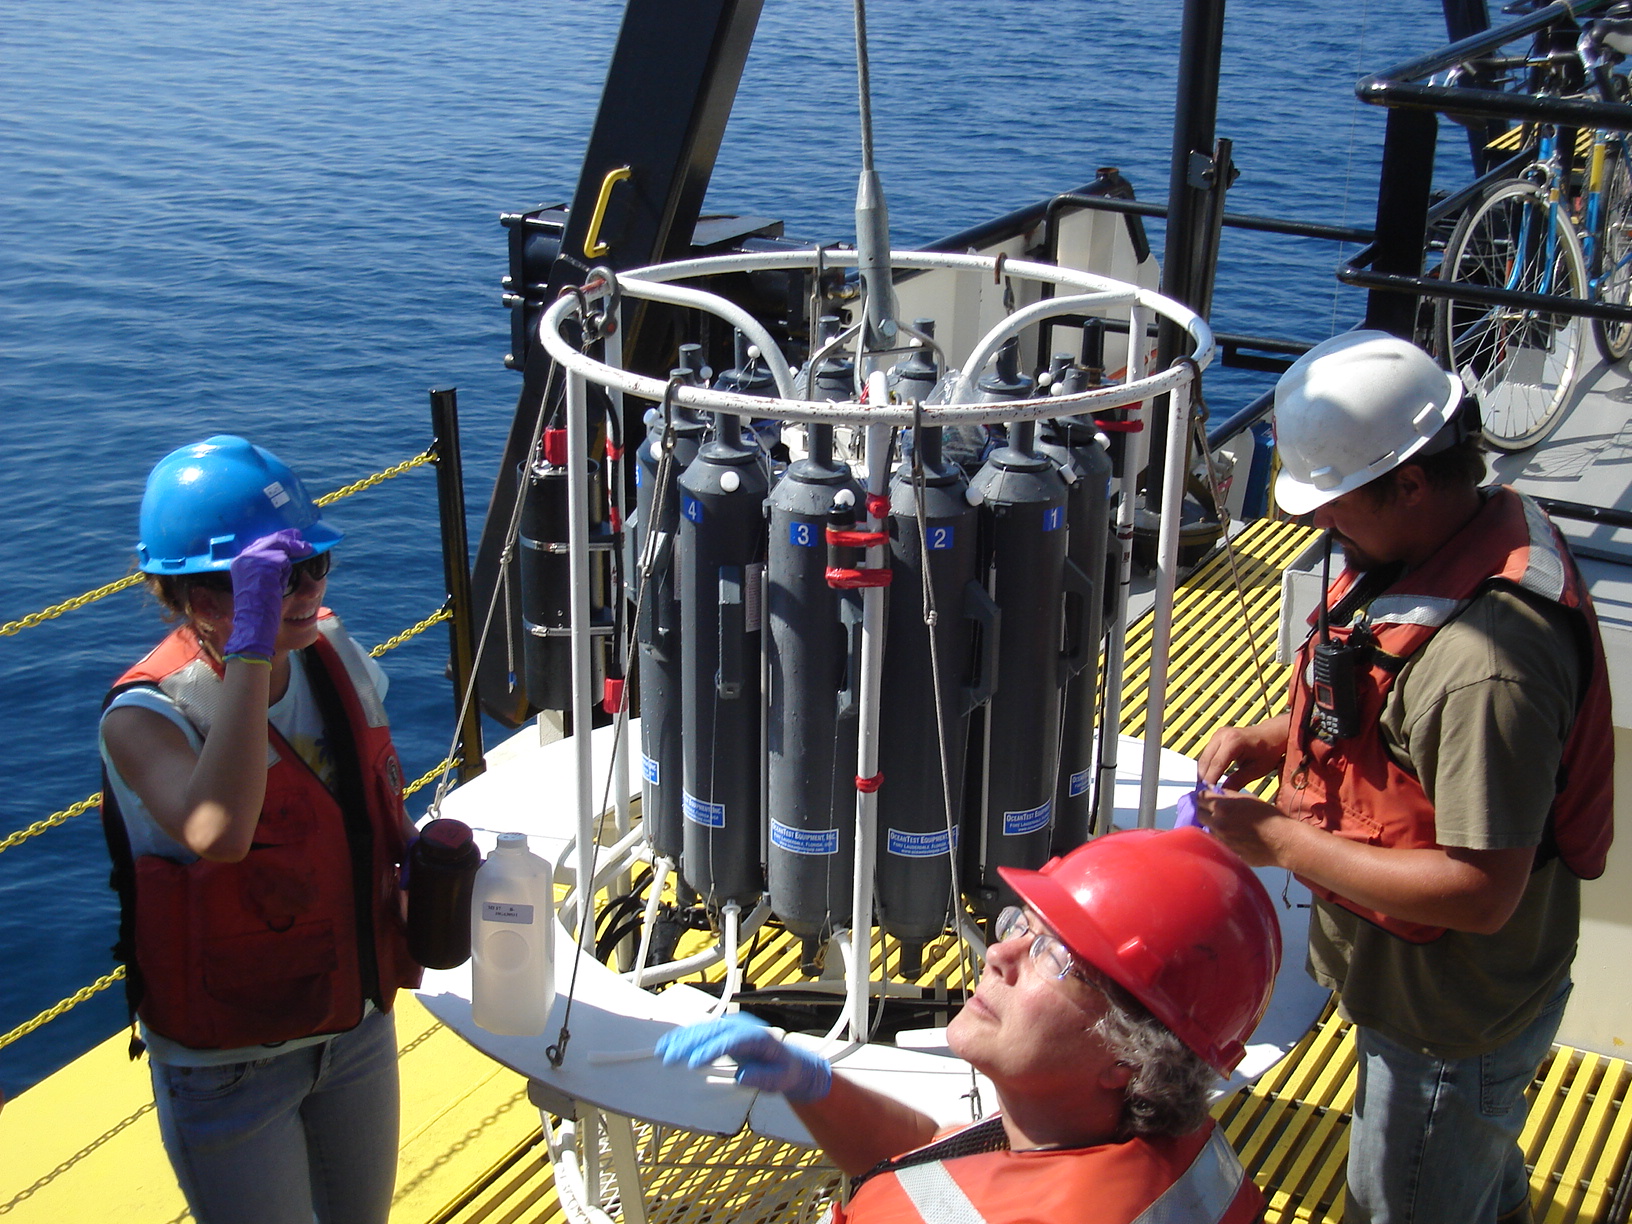 Researchers Collect Samples From The Great Lakes